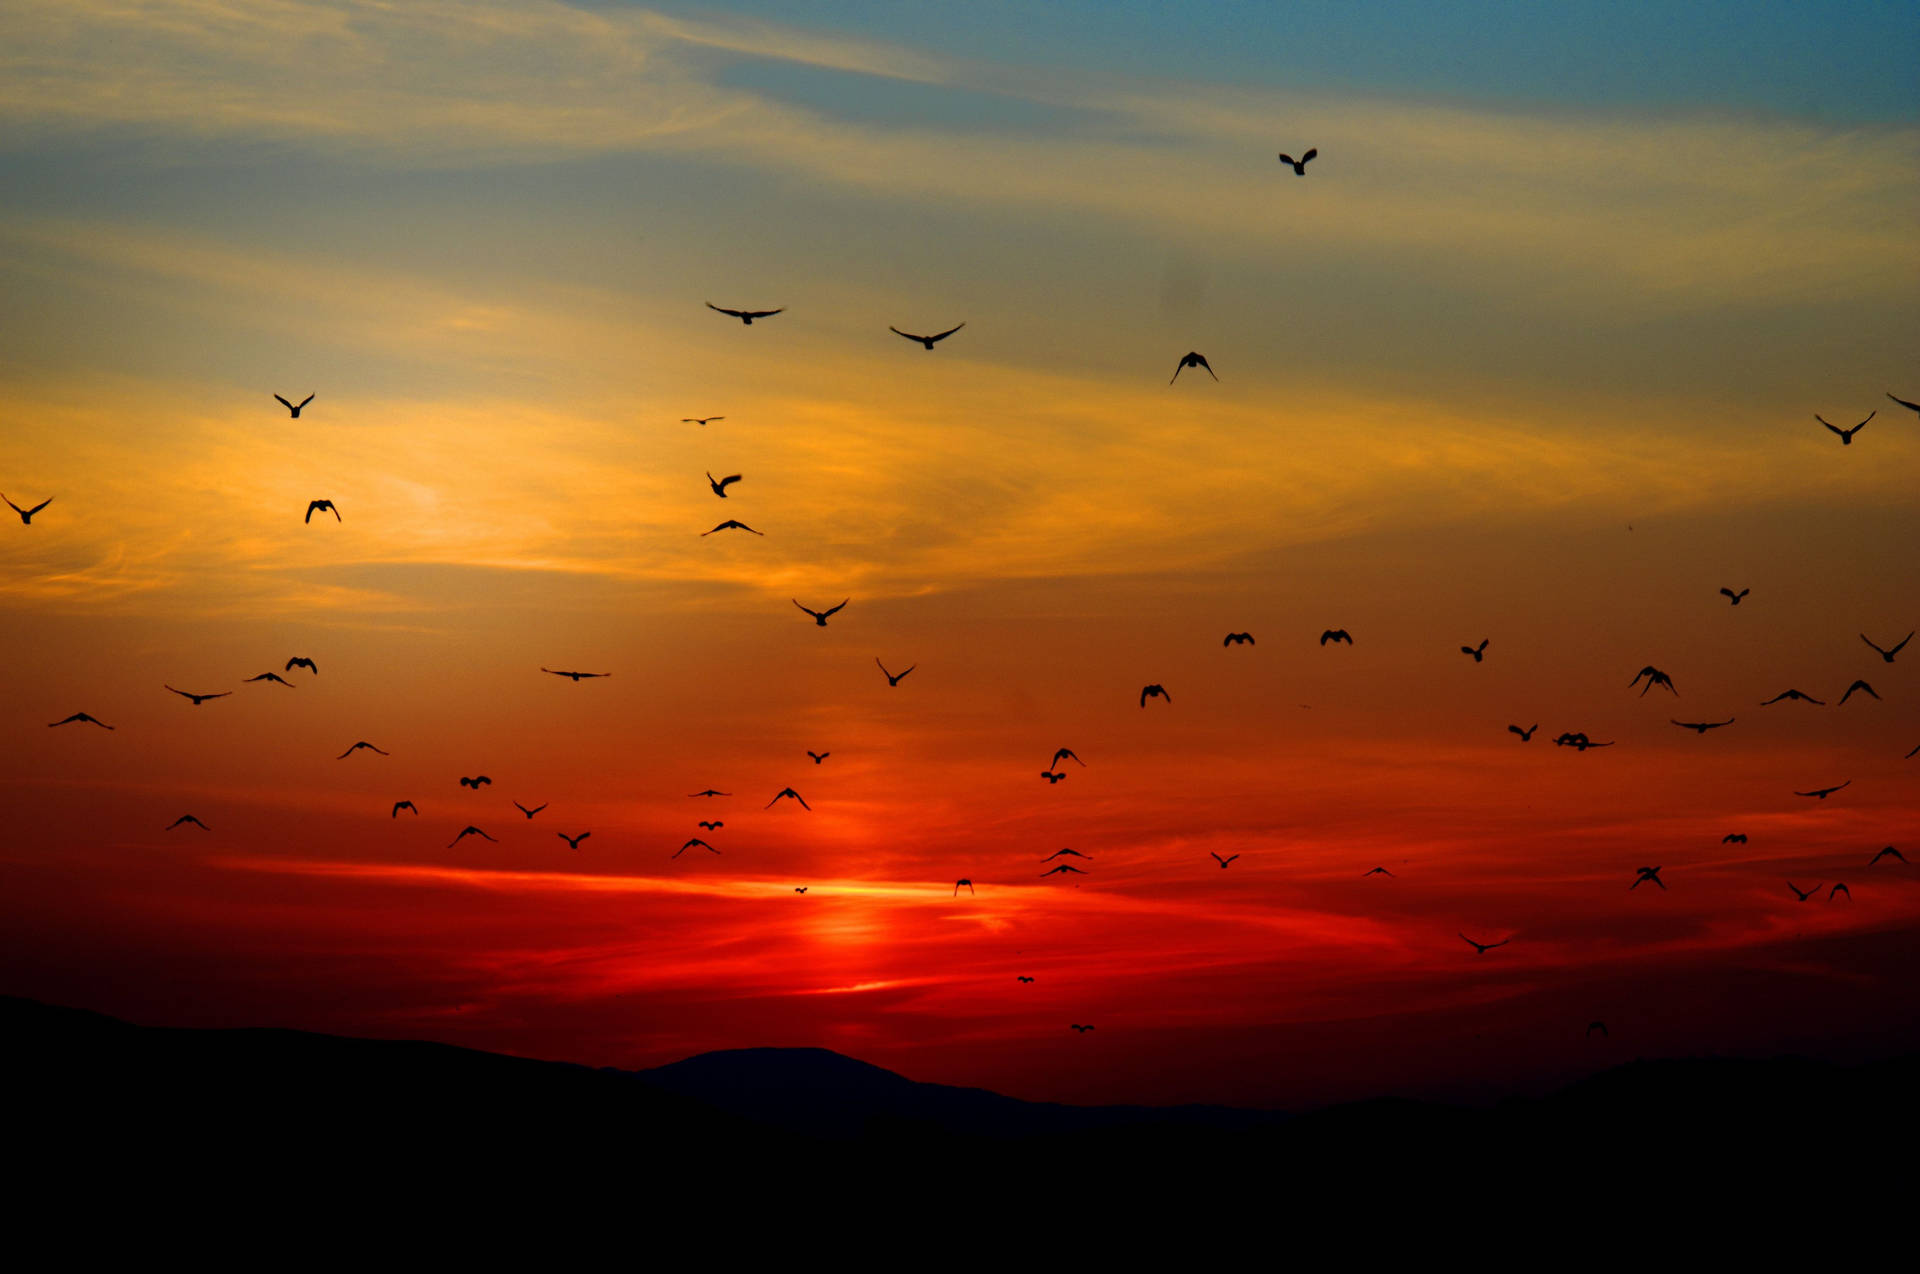 Caption: Majestic Birds Soaring in a Red-Hued Sky Wallpaper